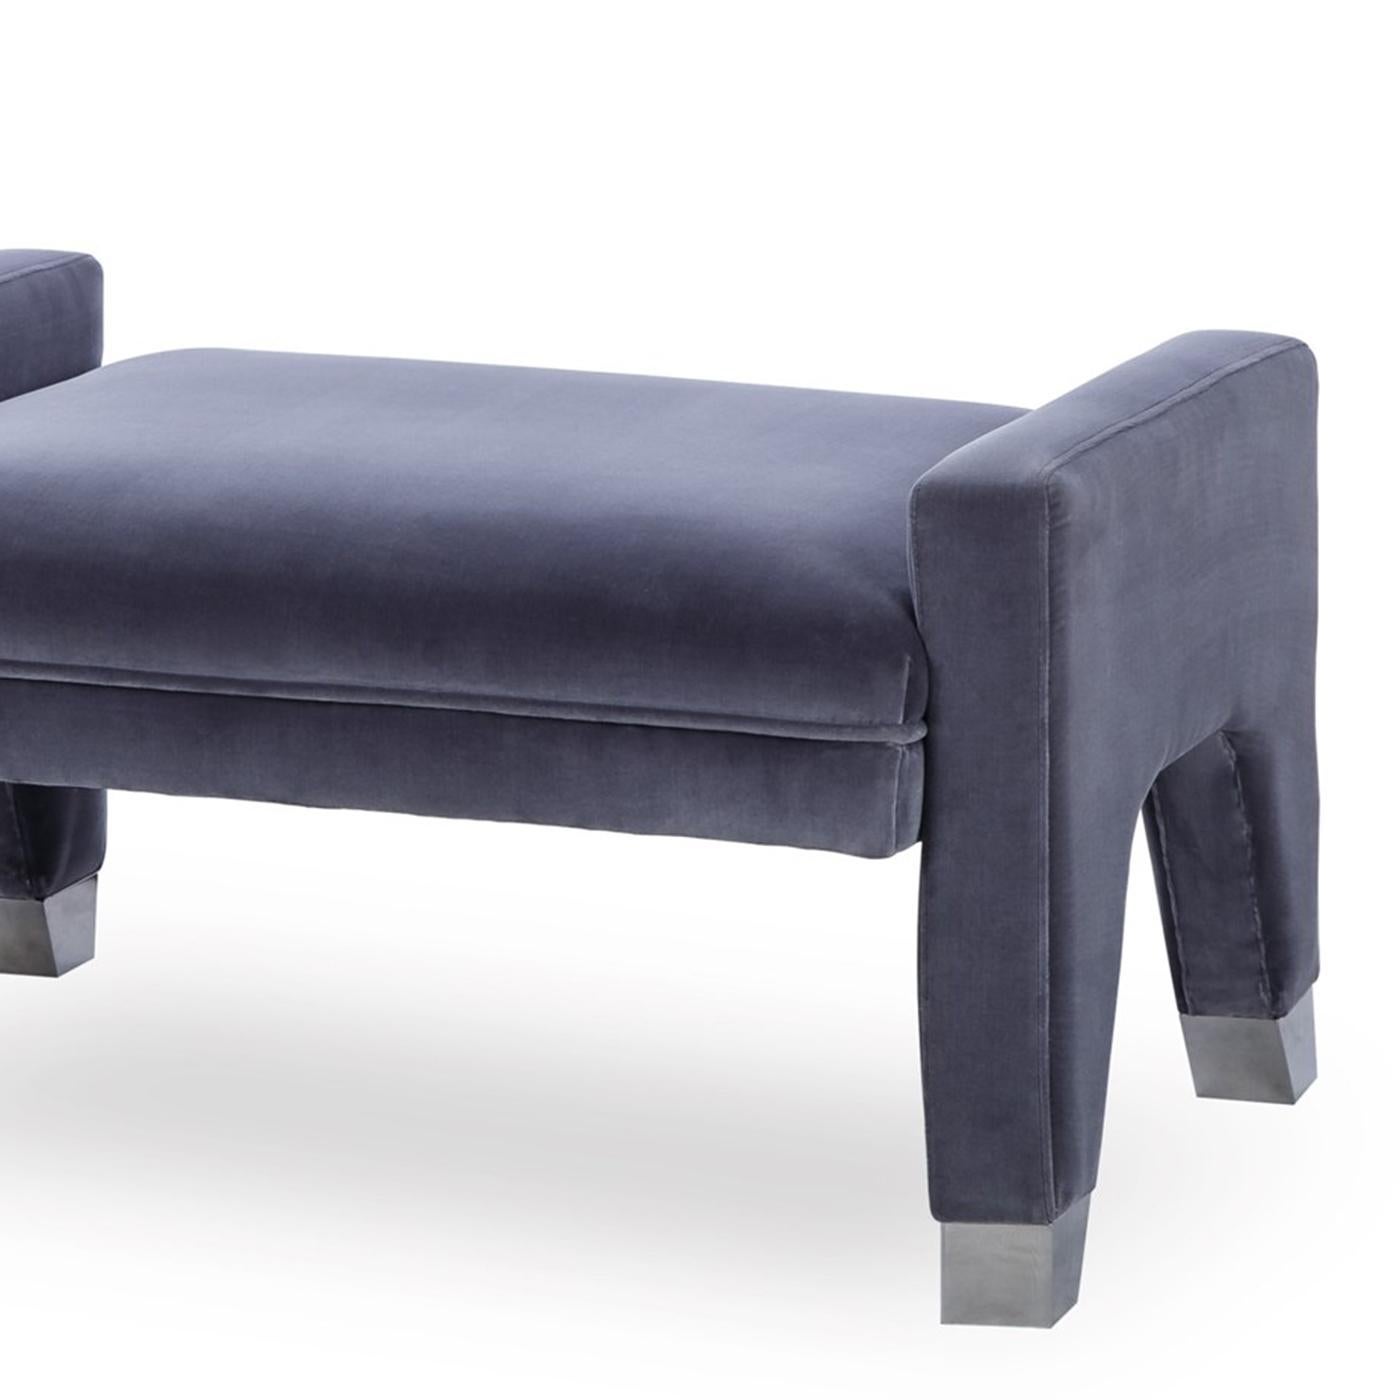 English Barry Bench with Faded Blue Velvet